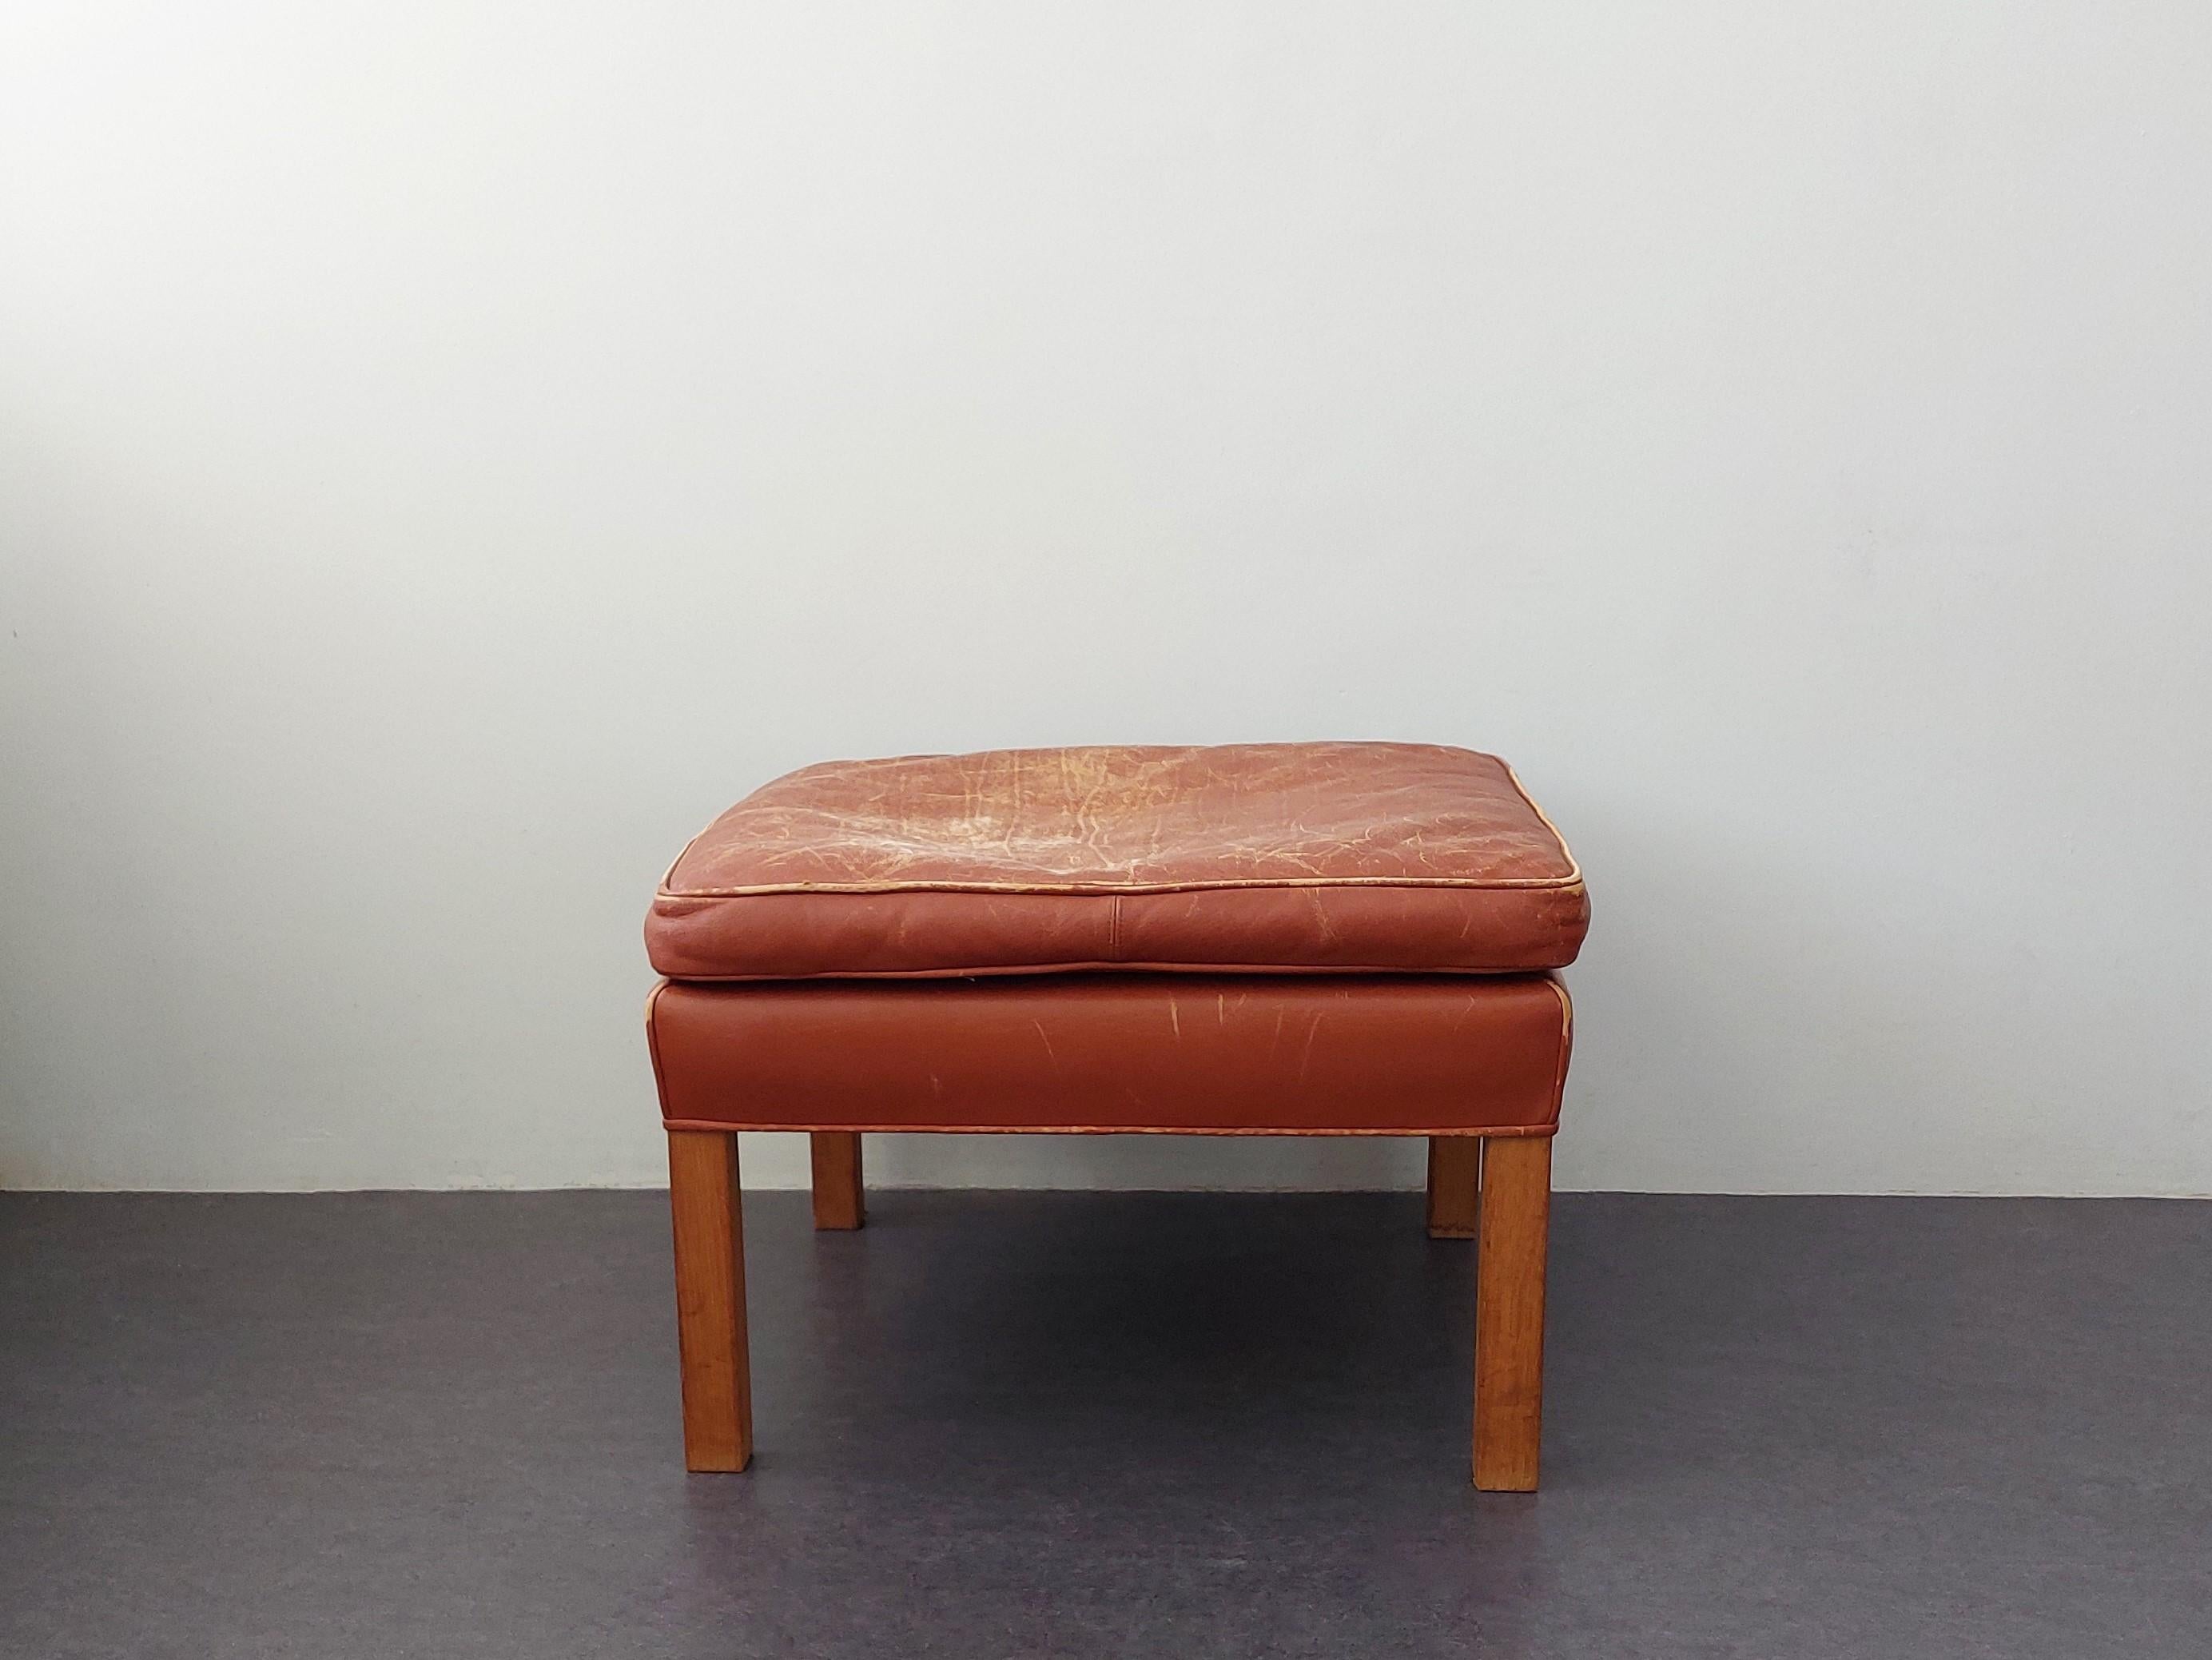 This brownd leather ottoman was designed by Børge Mogensen for Fredericia Furniture in Denmark in 1963. This piece was originally designed together with the matching Wingchair. All returned to his earlier design of 1962 with adusted specific